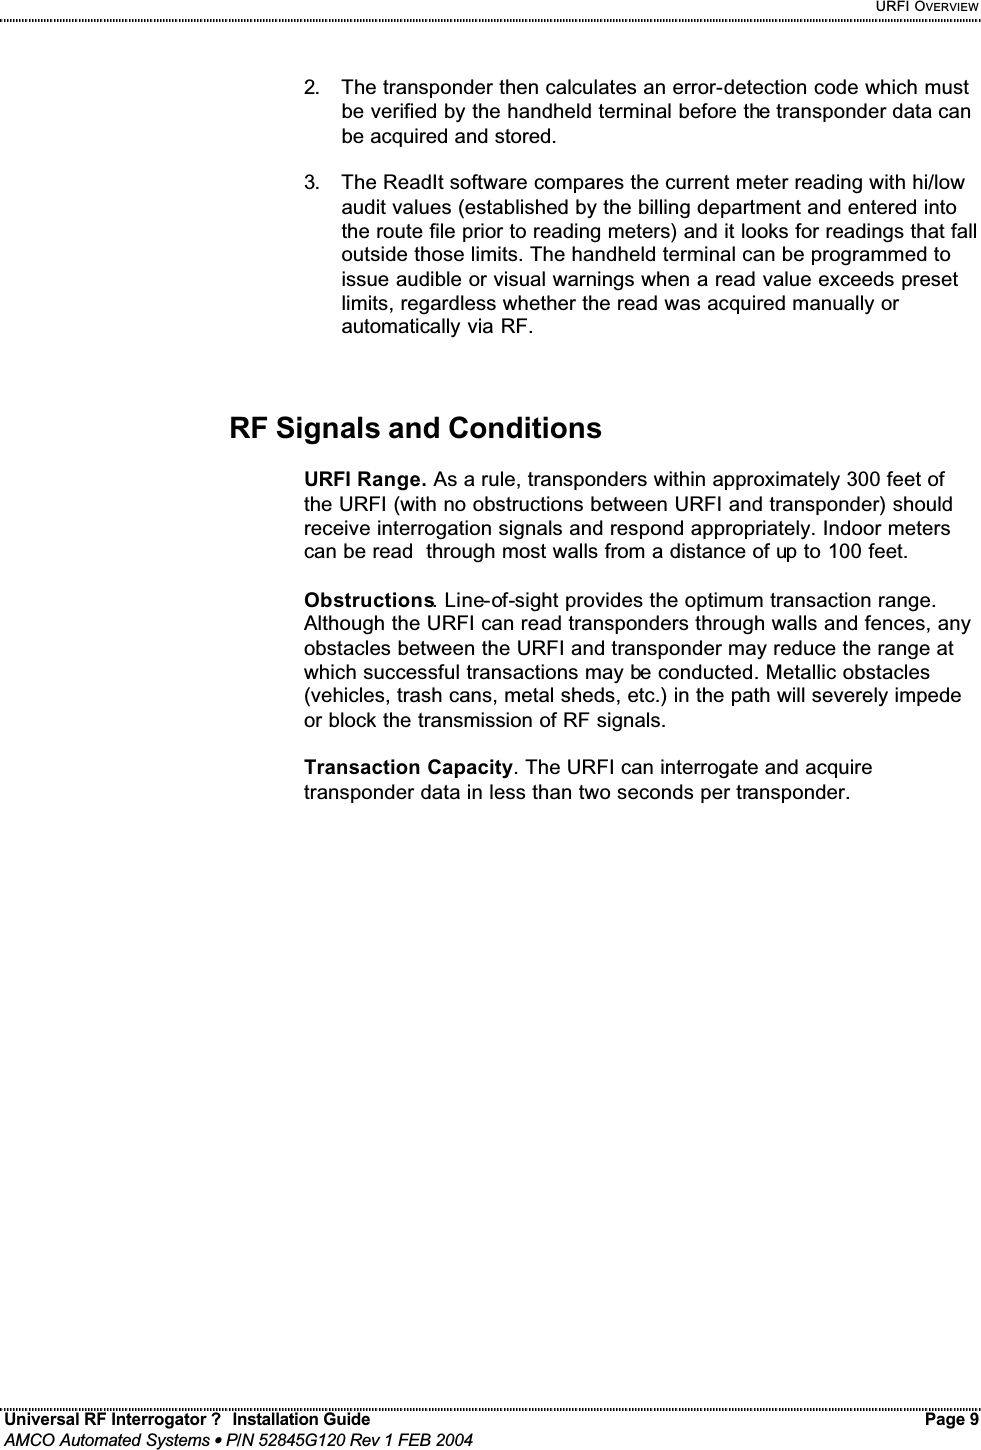     URFI OVERVIEW Universal RF Interrogator ?  Installation Guide    Page 9  AMCO Automated Systems • P/N 52845G120 Rev 1 FEB 2004                                                                                                                                 2.  The transponder then calculates an error-detection code which must be verified by the handheld terminal before the transponder data can be acquired and stored.  3.  The ReadIt software compares the current meter reading with hi/low audit values (established by the billing department and entered into the route file prior to reading meters) and it looks for readings that fall outside those limits. The handheld terminal can be programmed to issue audible or visual warnings when a read value exceeds preset limits, regardless whether the read was acquired manually or automatically via RF.    RF Signals and Conditions  URFI Range. As a rule, transponders within approximately 300 feet of the URFI (with no obstructions between URFI and transponder) should  receive interrogation signals and respond appropriately. Indoor meters can be read  through most walls from a distance of up to 100 feet.  Obstructions. Line-of-sight provides the optimum transaction range. Although the URFI can read transponders through walls and fences, any obstacles between the URFI and transponder may reduce the range at which successful transactions may be conducted. Metallic obstacles (vehicles, trash cans, metal sheds, etc.) in the path will severely impede or block the transmission of RF signals.  Transaction Capacity. The URFI can interrogate and acquire transponder data in less than two seconds per transponder.   